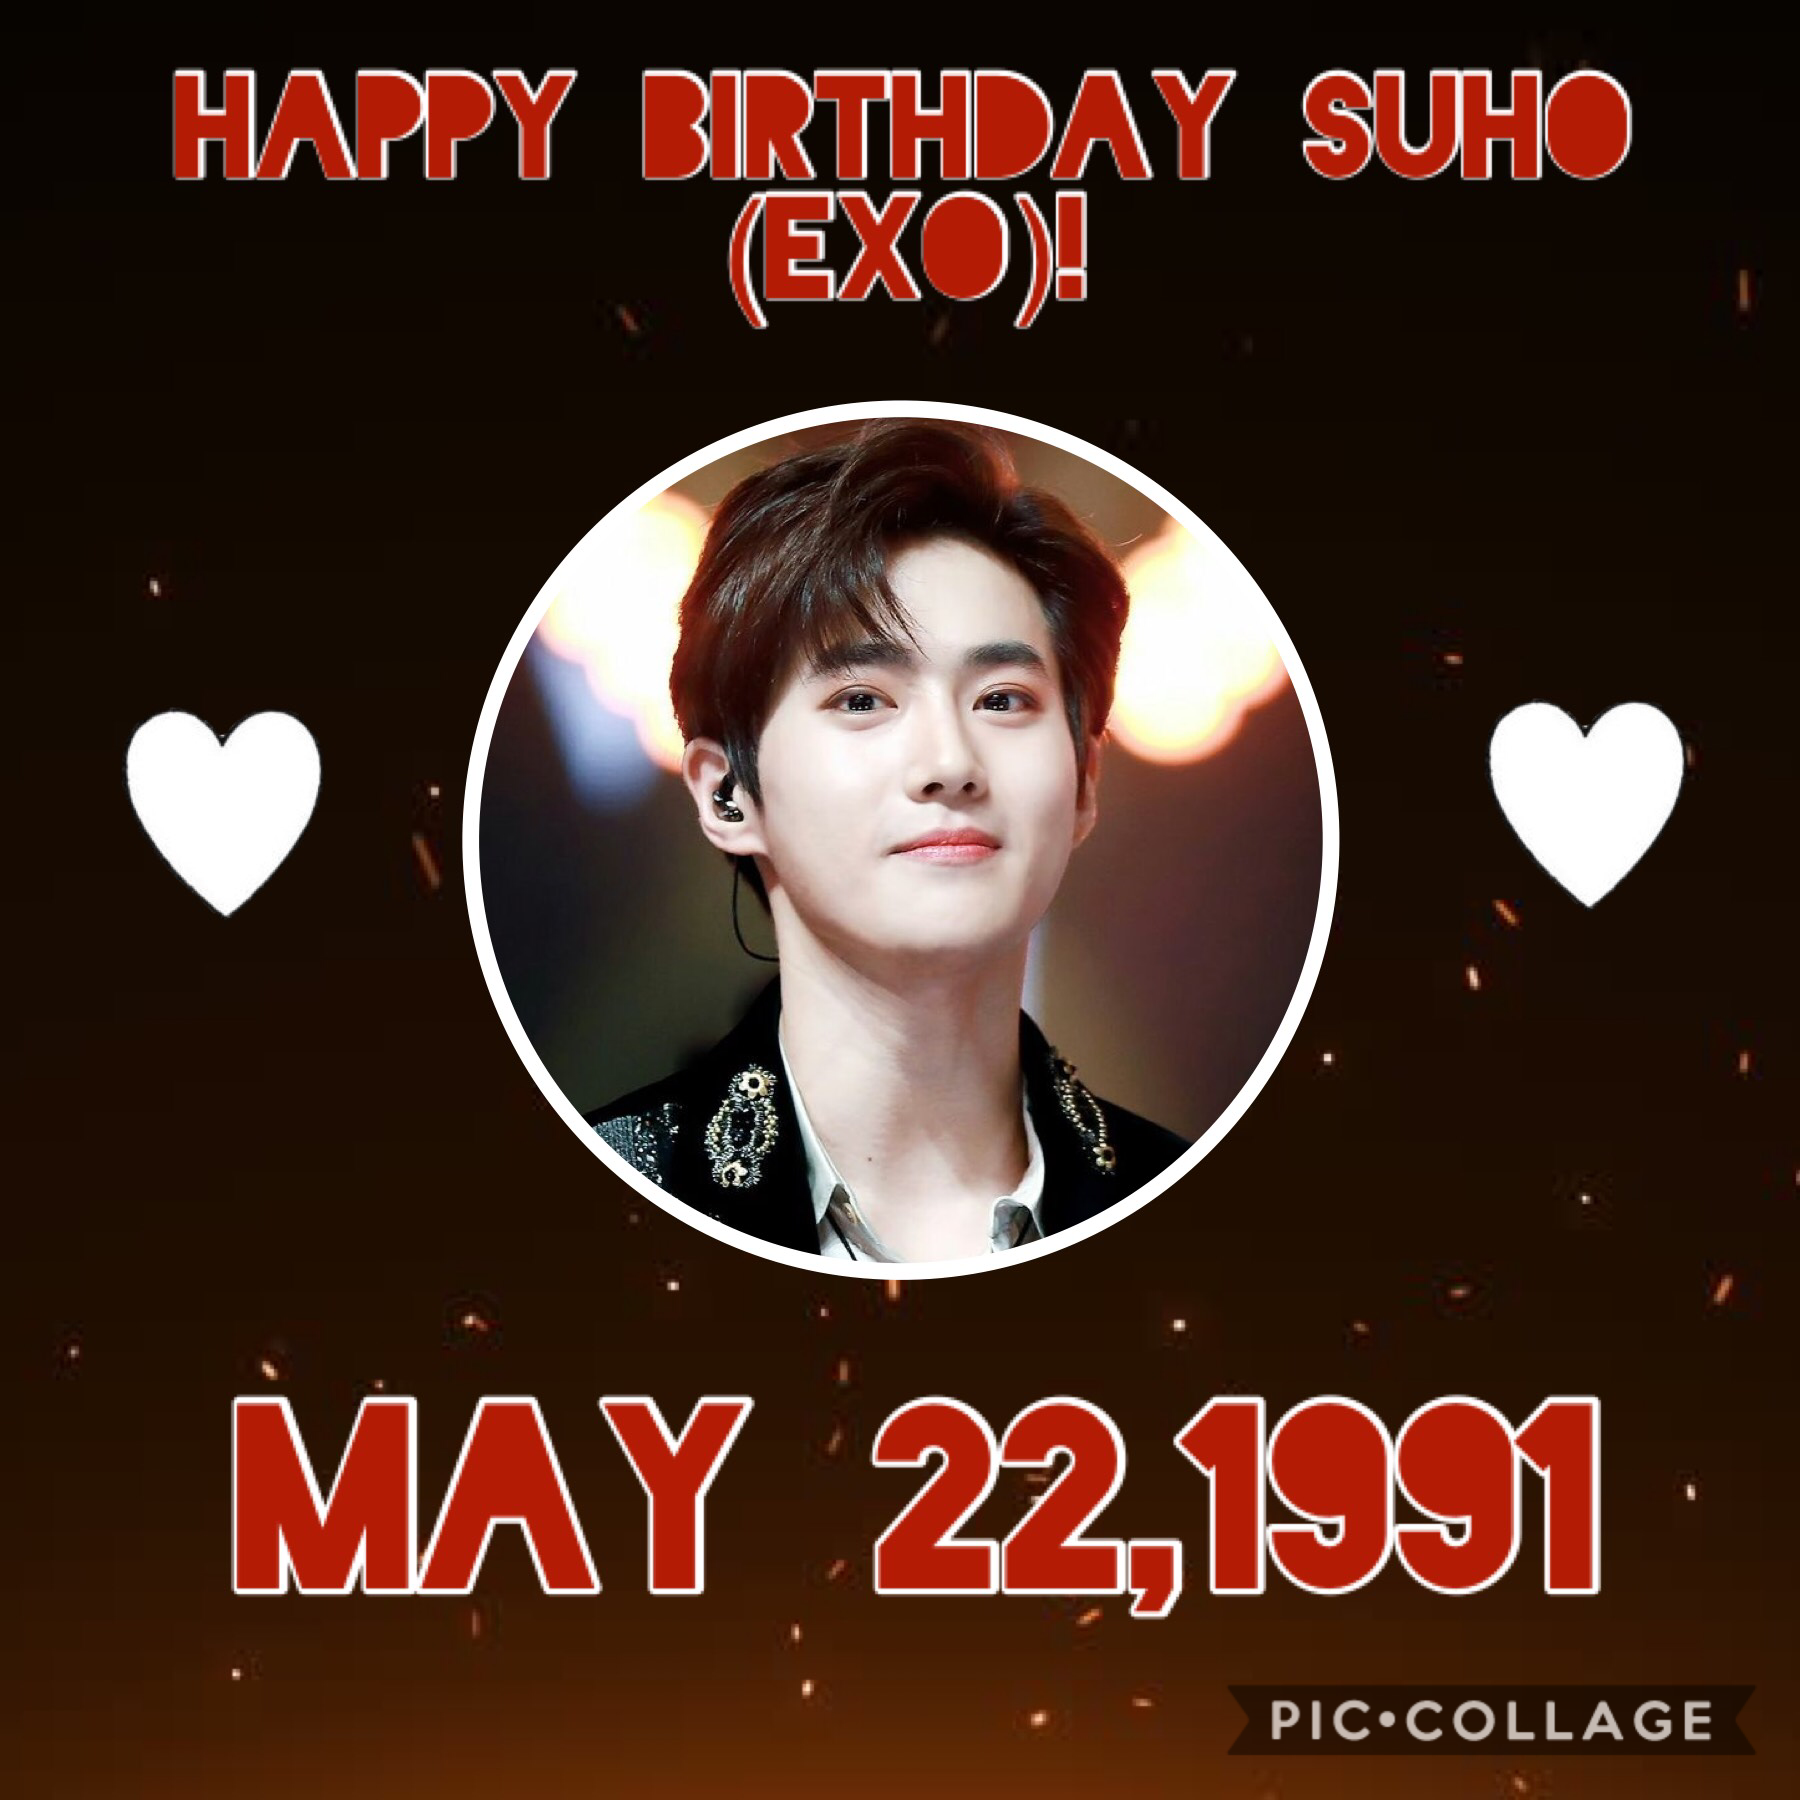 •Kim Junmyeon•
Happy birthday to the leader of one of the biggest groups in Kpop❤️
Other birthdays:
•JBJ95’s SangGyun~May 23
•LOONA’s Yves~May 24
•PRISTIN’s Sungyeon~ May 25
🌹🌷🌹🌷🌹🌷🌹🌷🌹